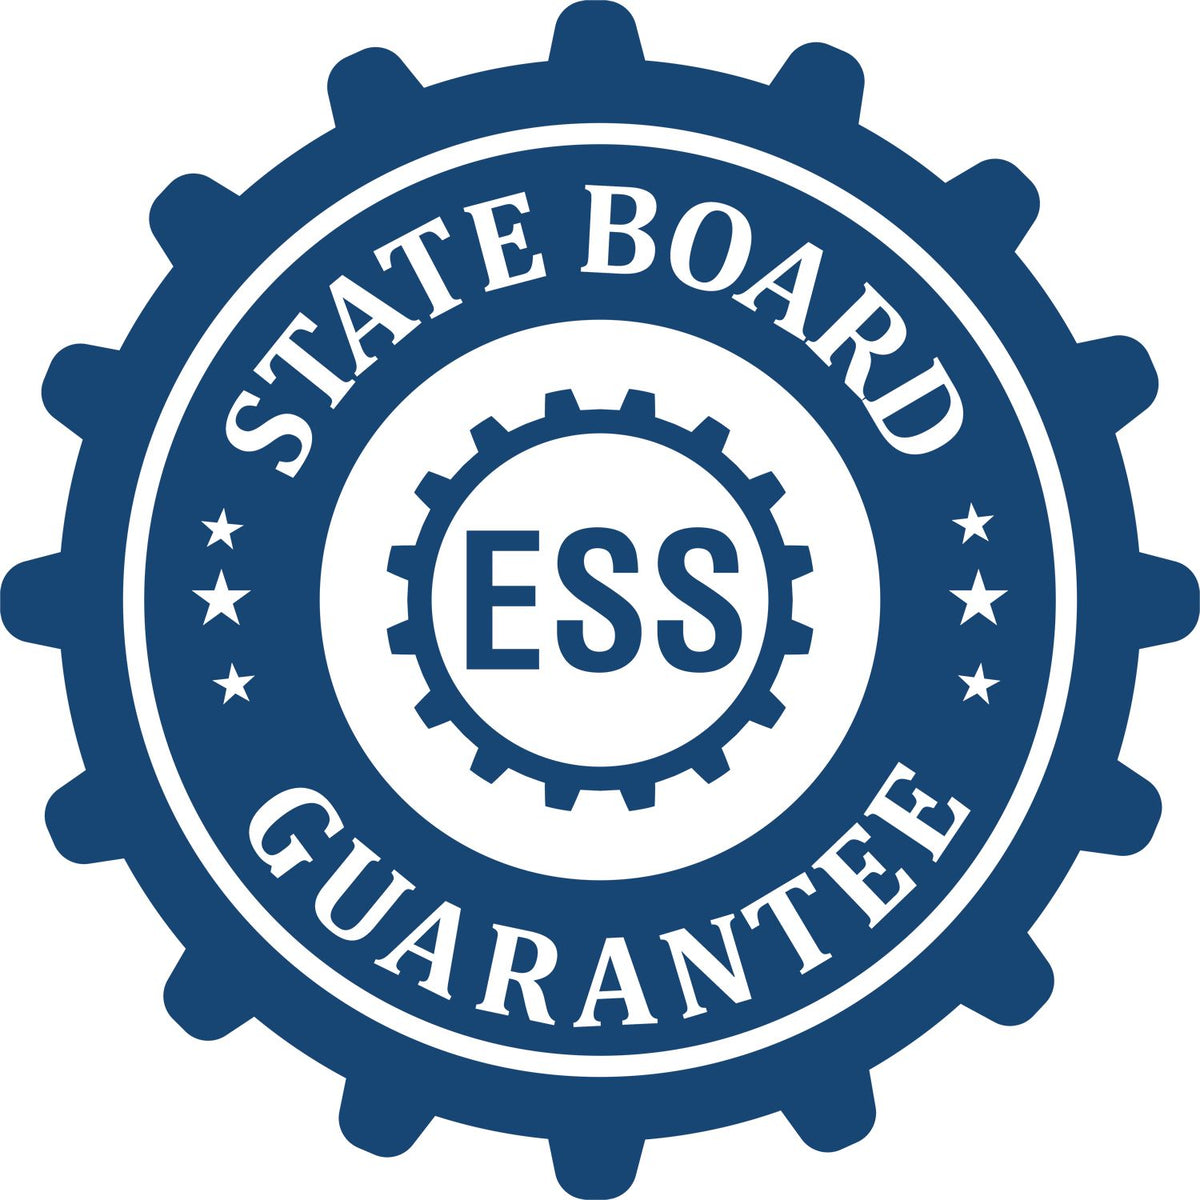 An emblem in a gear shape illustrating a state board guarantee for the Missouri Engineer Desk Seal product.